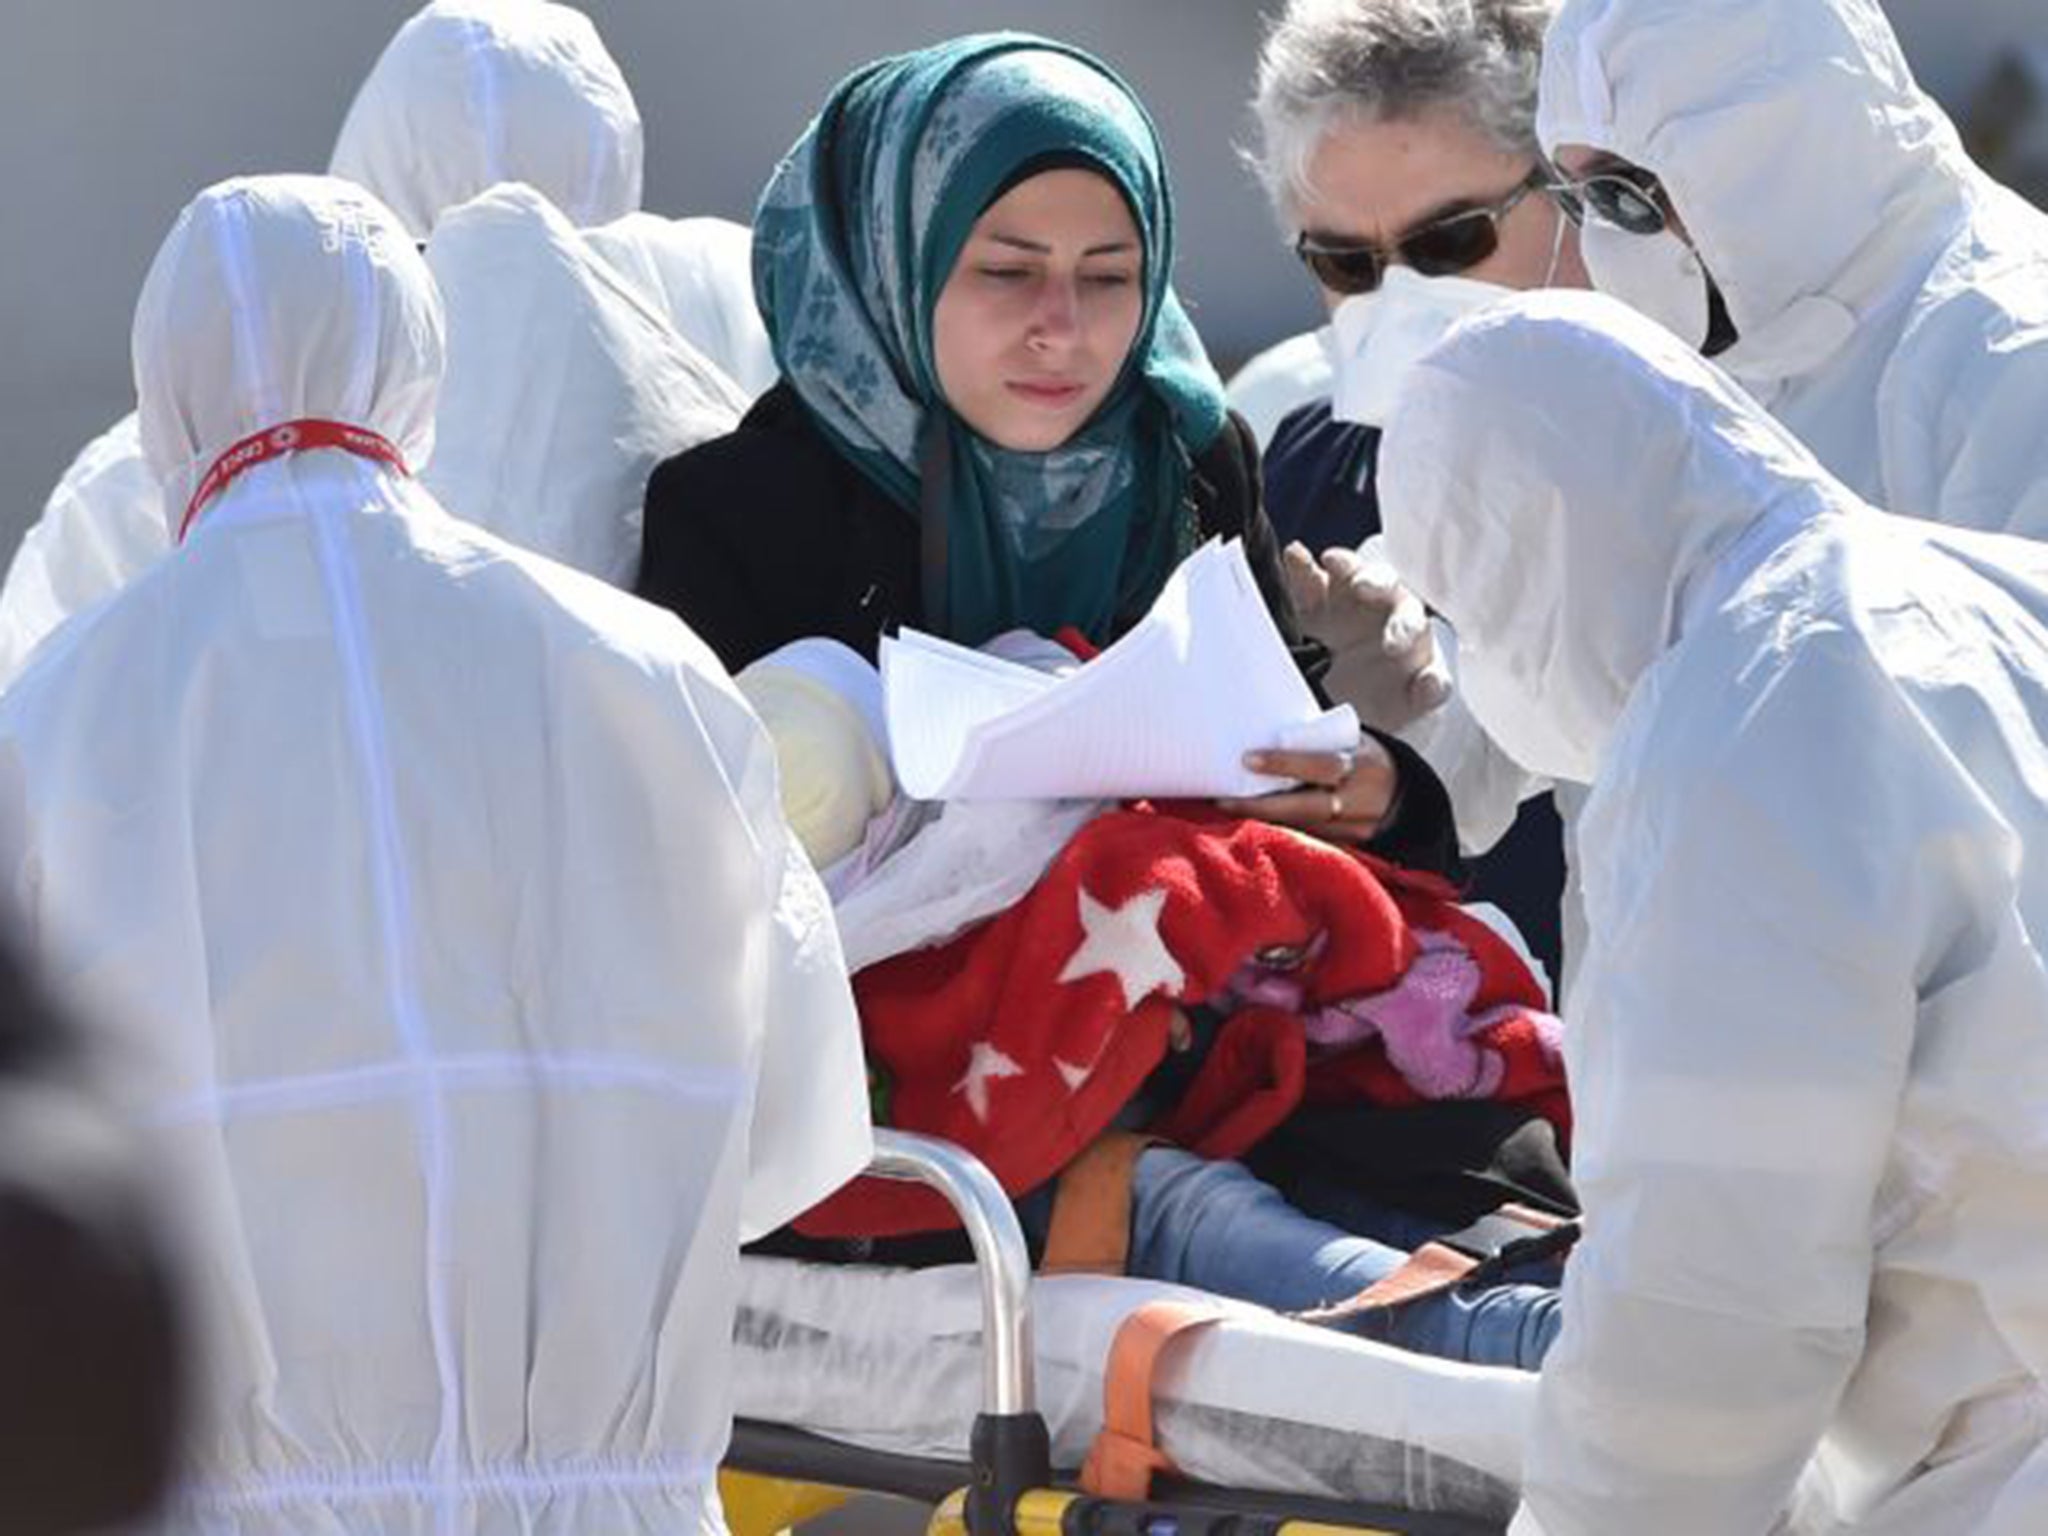 A mother and child receive first aid as they disembark in Italy on Saturday